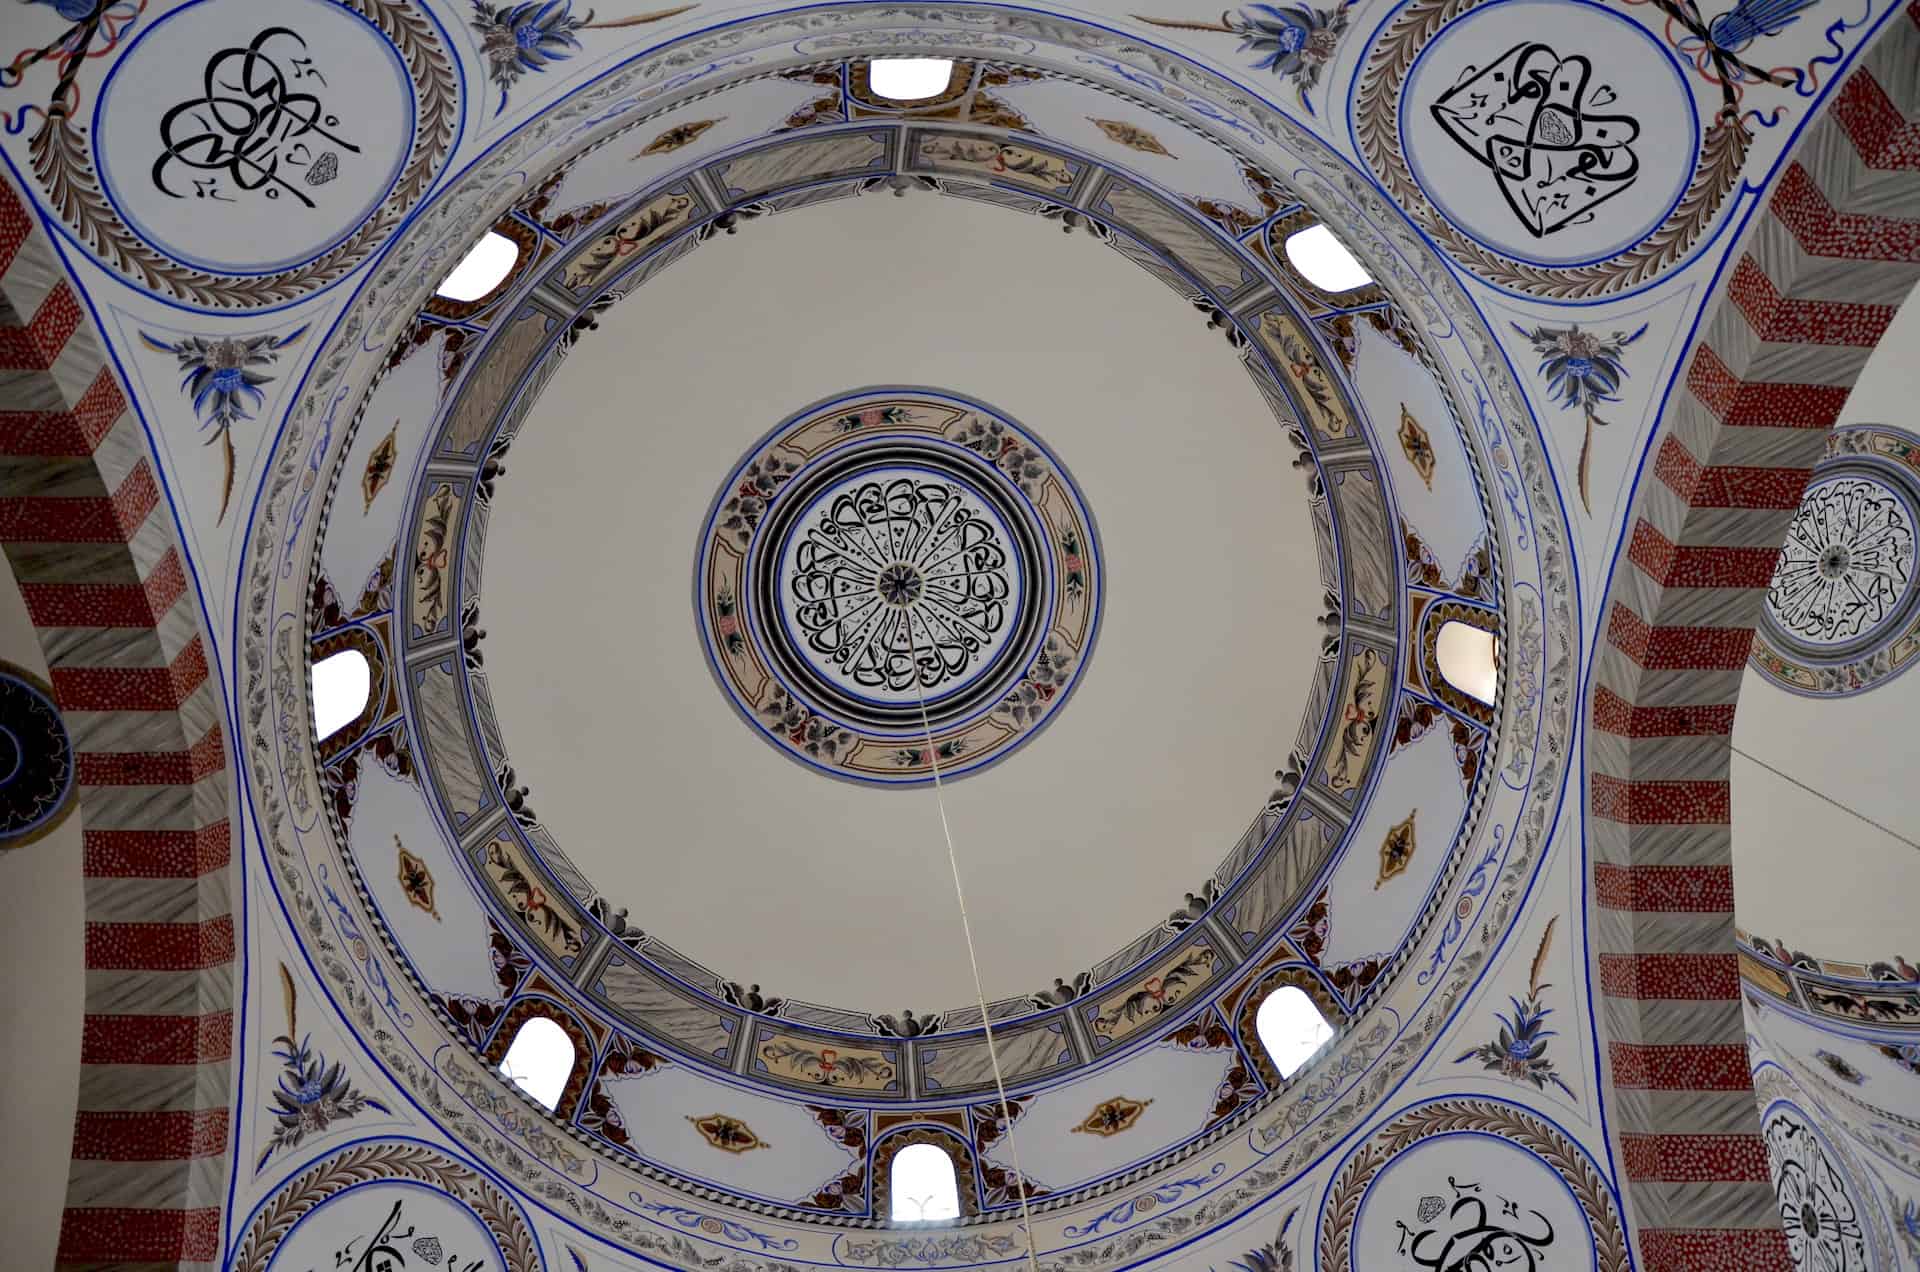 Dome of the Great Mosque in Kütahya, Turkey